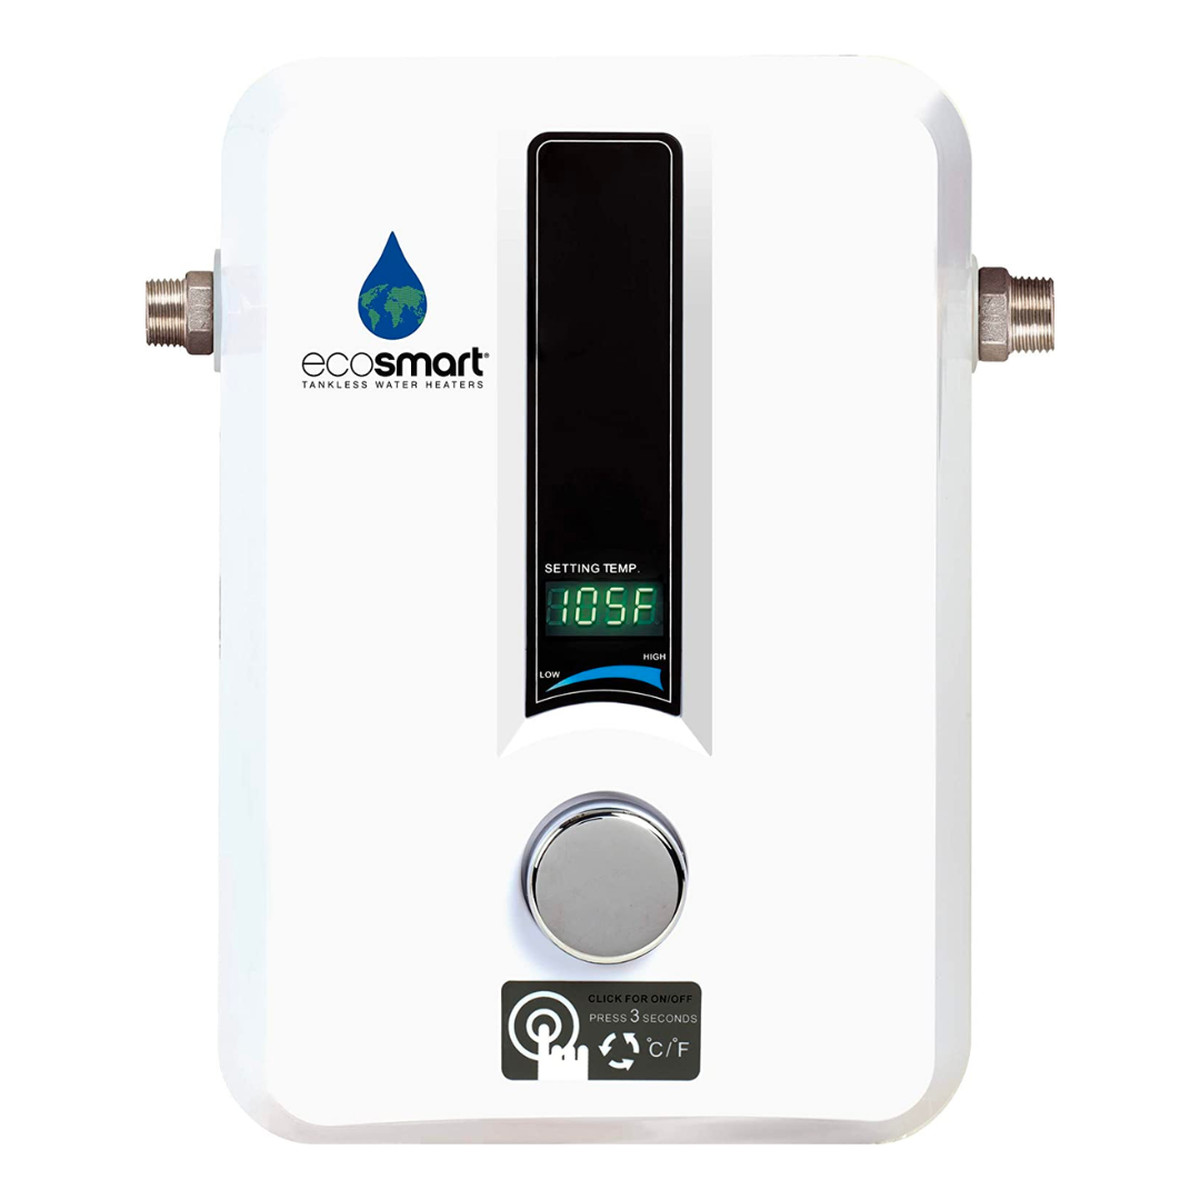 White EcoSmart electric tankless water heater with digital temperature screen